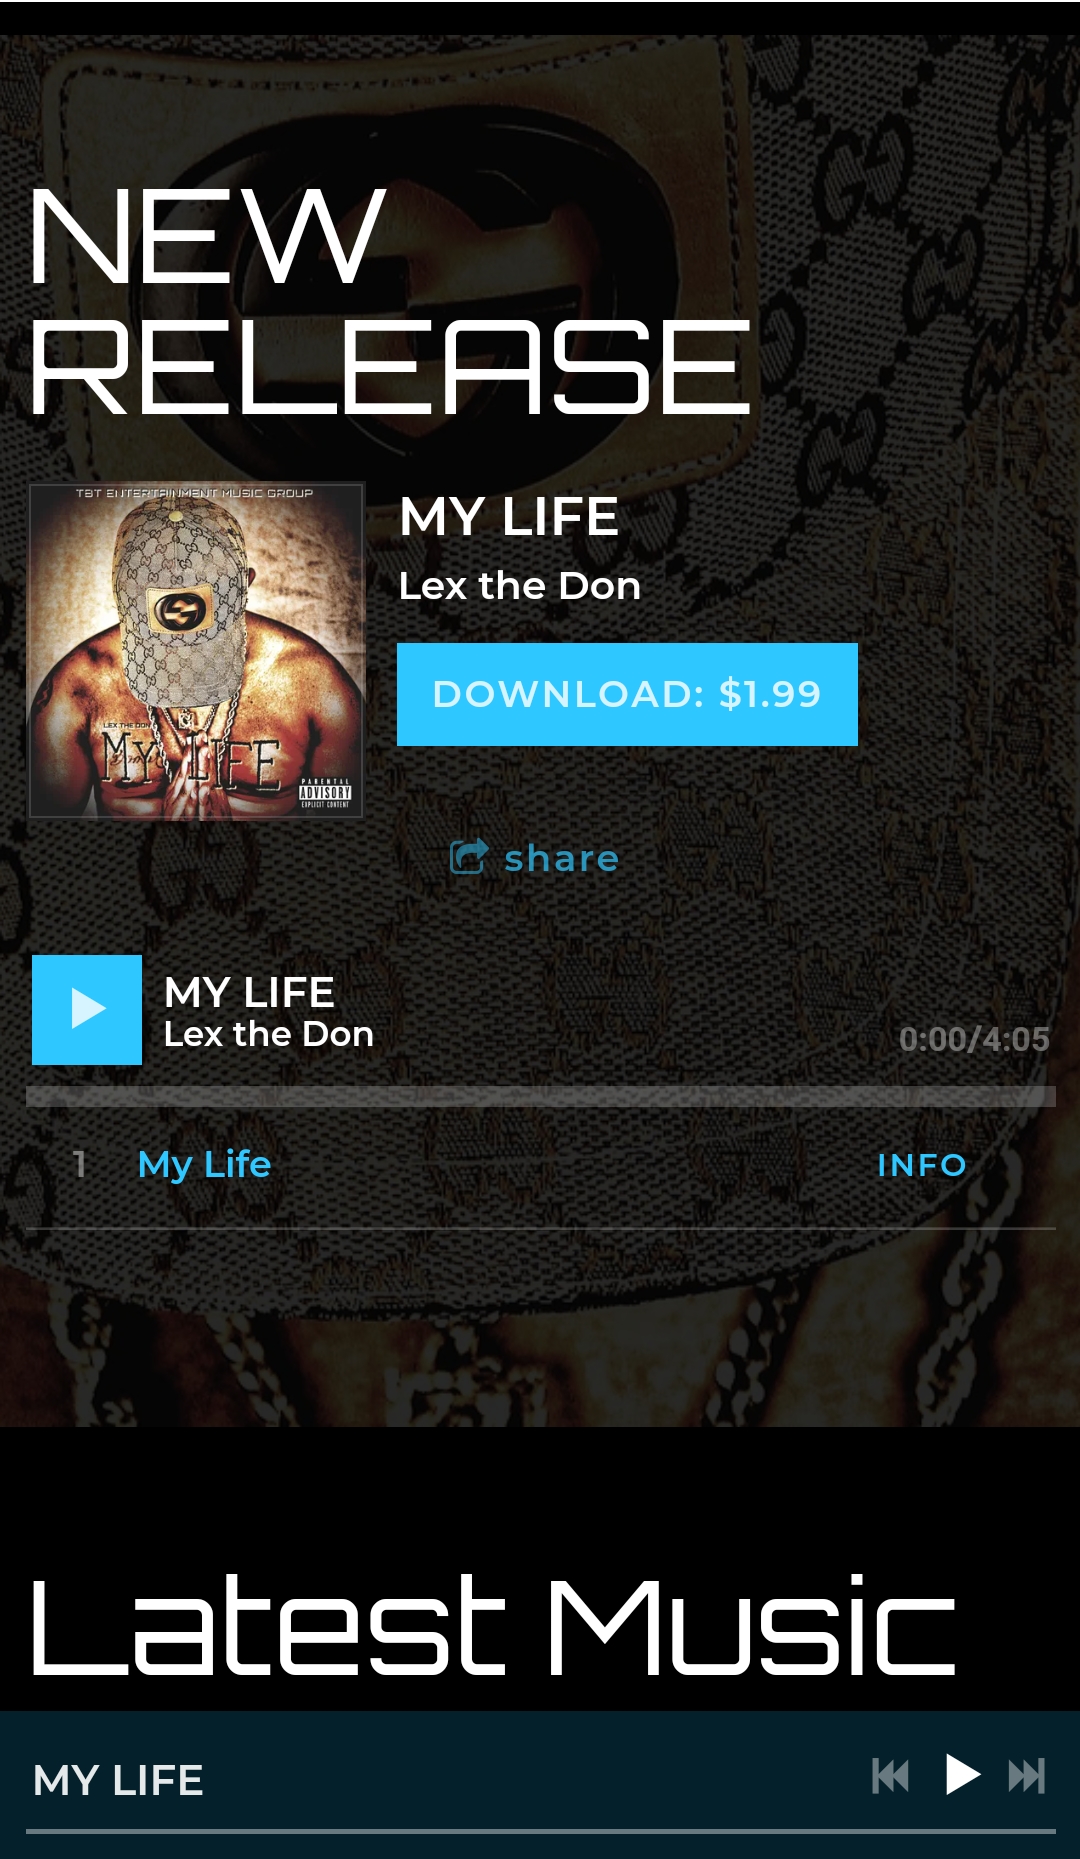 South Carolina Based Artist/Label Owner Lex the Don Launches New Artist Website